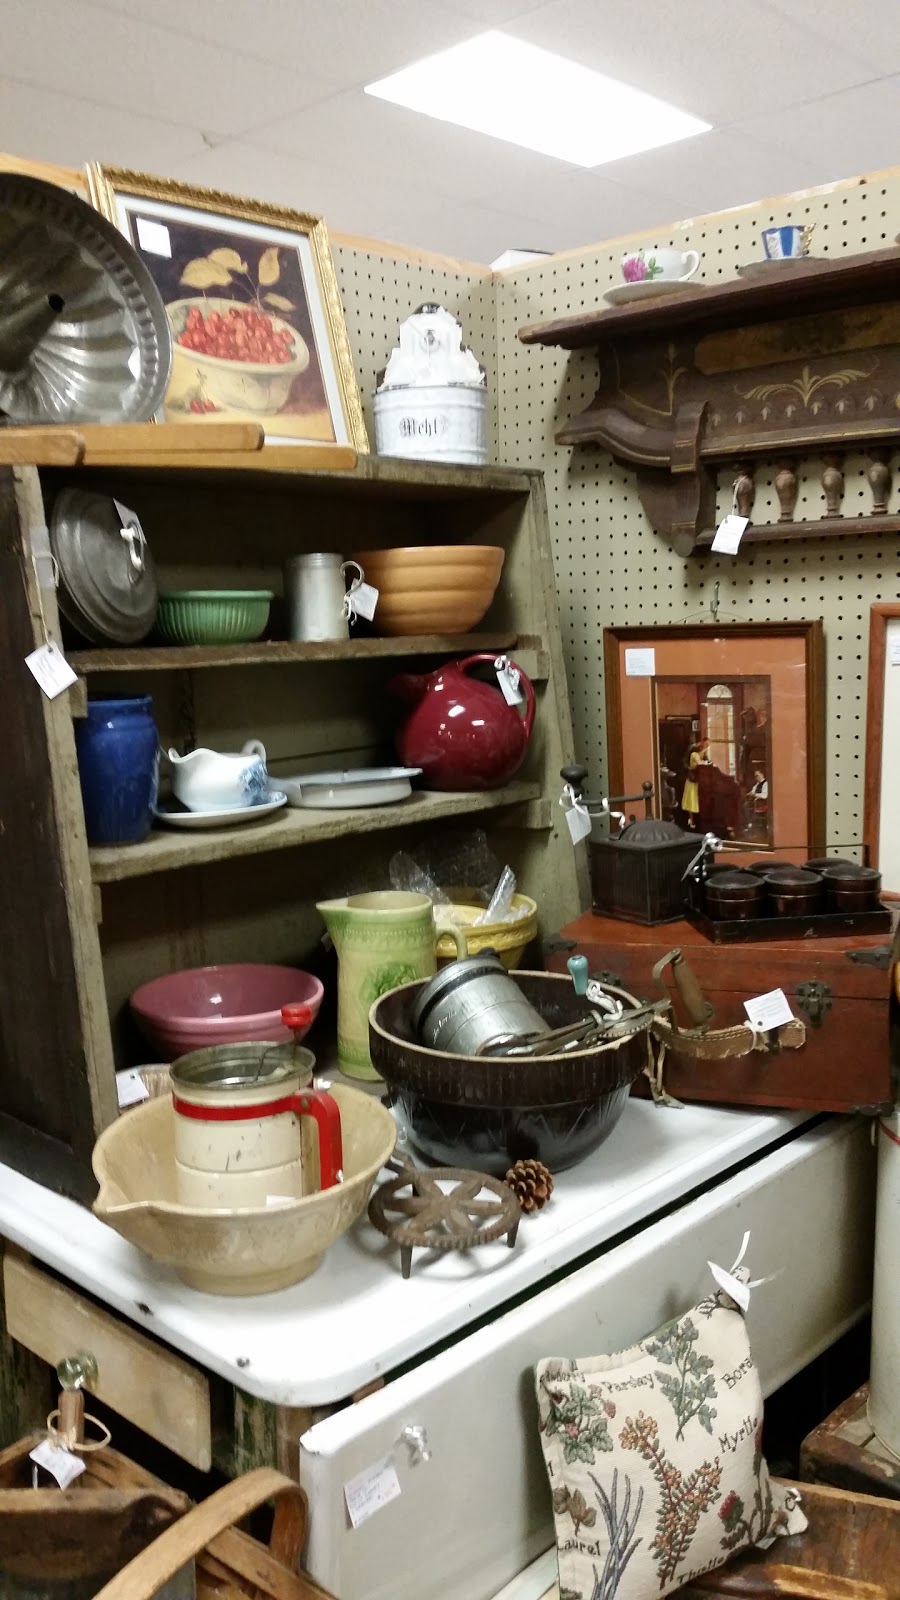 Grapevine Antiques & Craft | Behind CVS Pharmacy, 137 Erin Ln, Brodheadsville, PA 18322 | Phone: (570) 992-4525